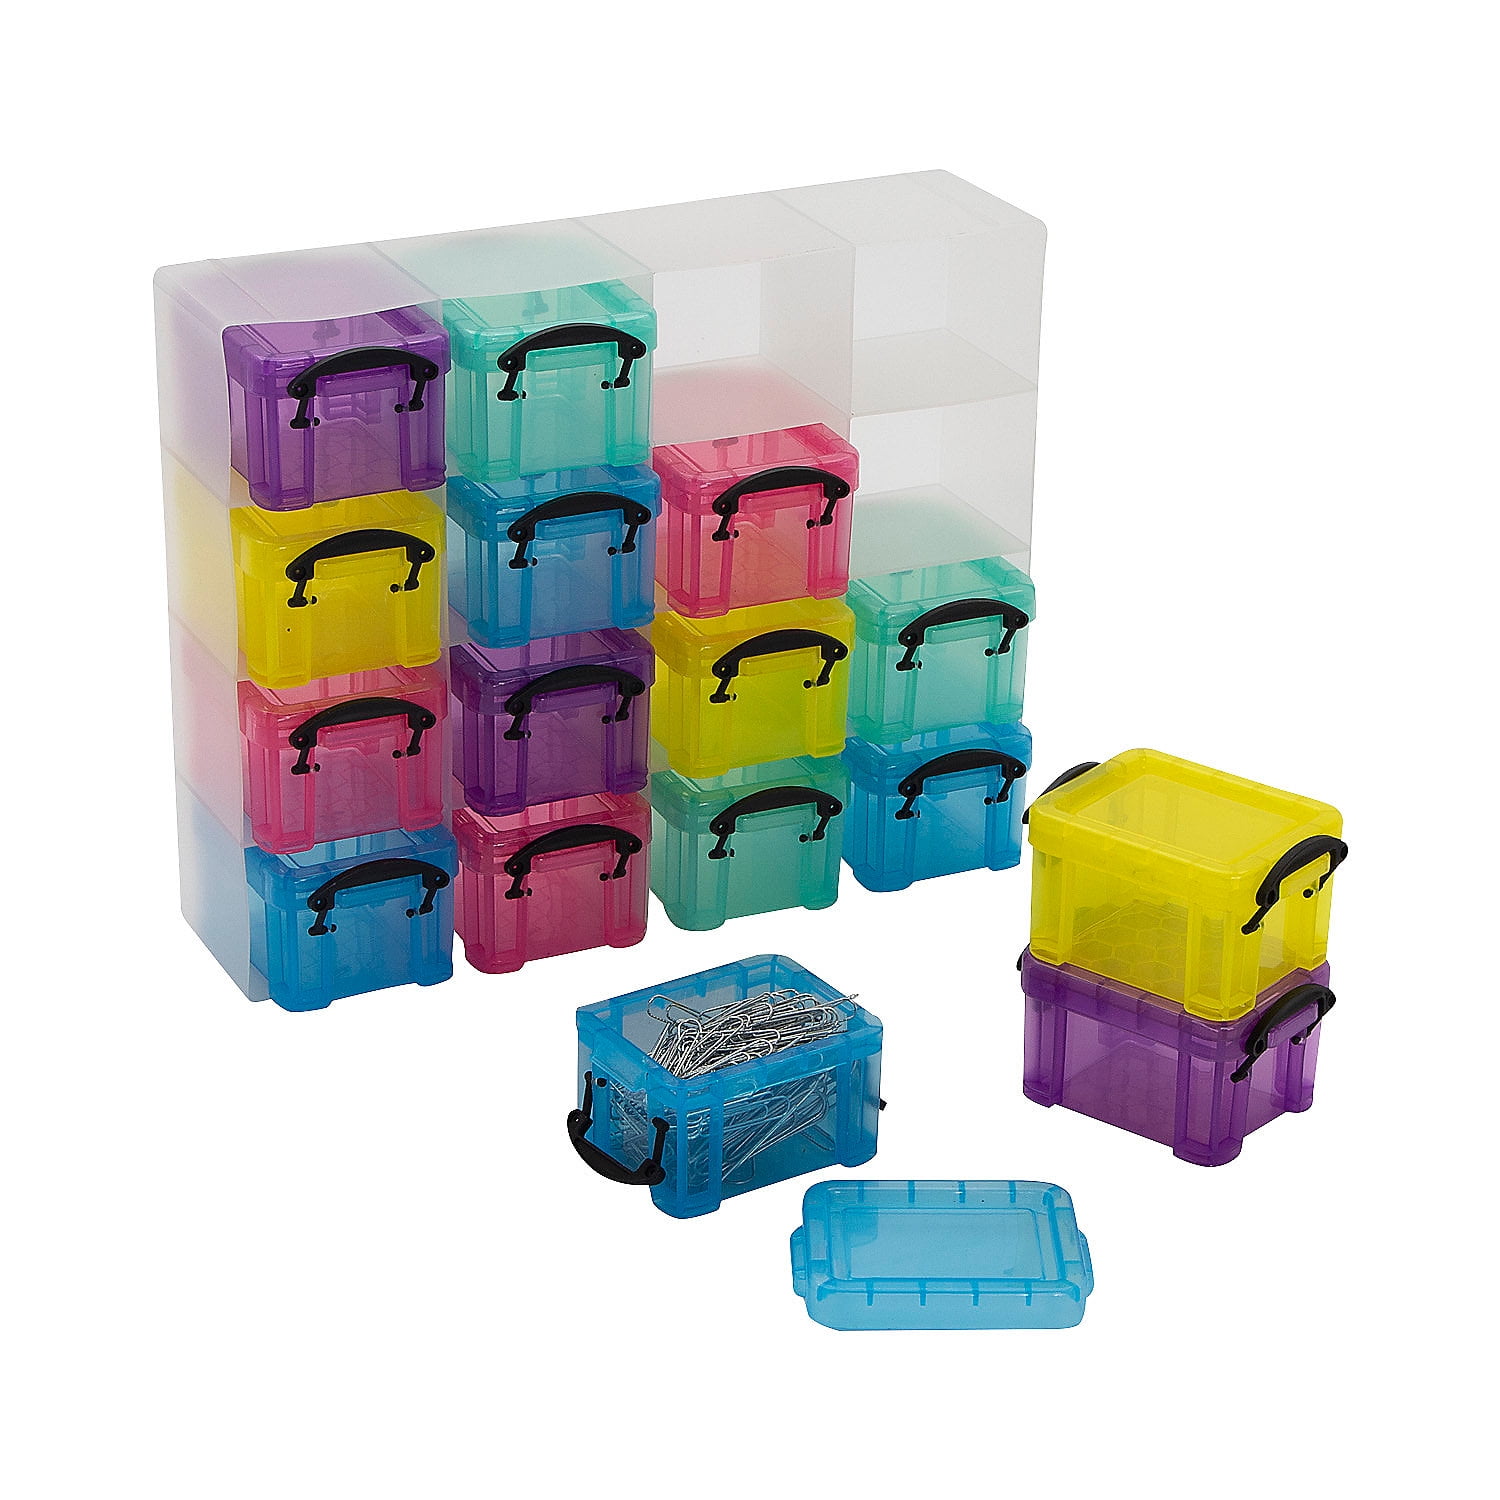 Snap-N-Store Storage Box - Pack of 2 Small, Collapsible, 9.25 x 5.63 x 8.13 inch Storage Boxes w/Lids for Kids, Crafts, Toys, Games and Organizing, Fo